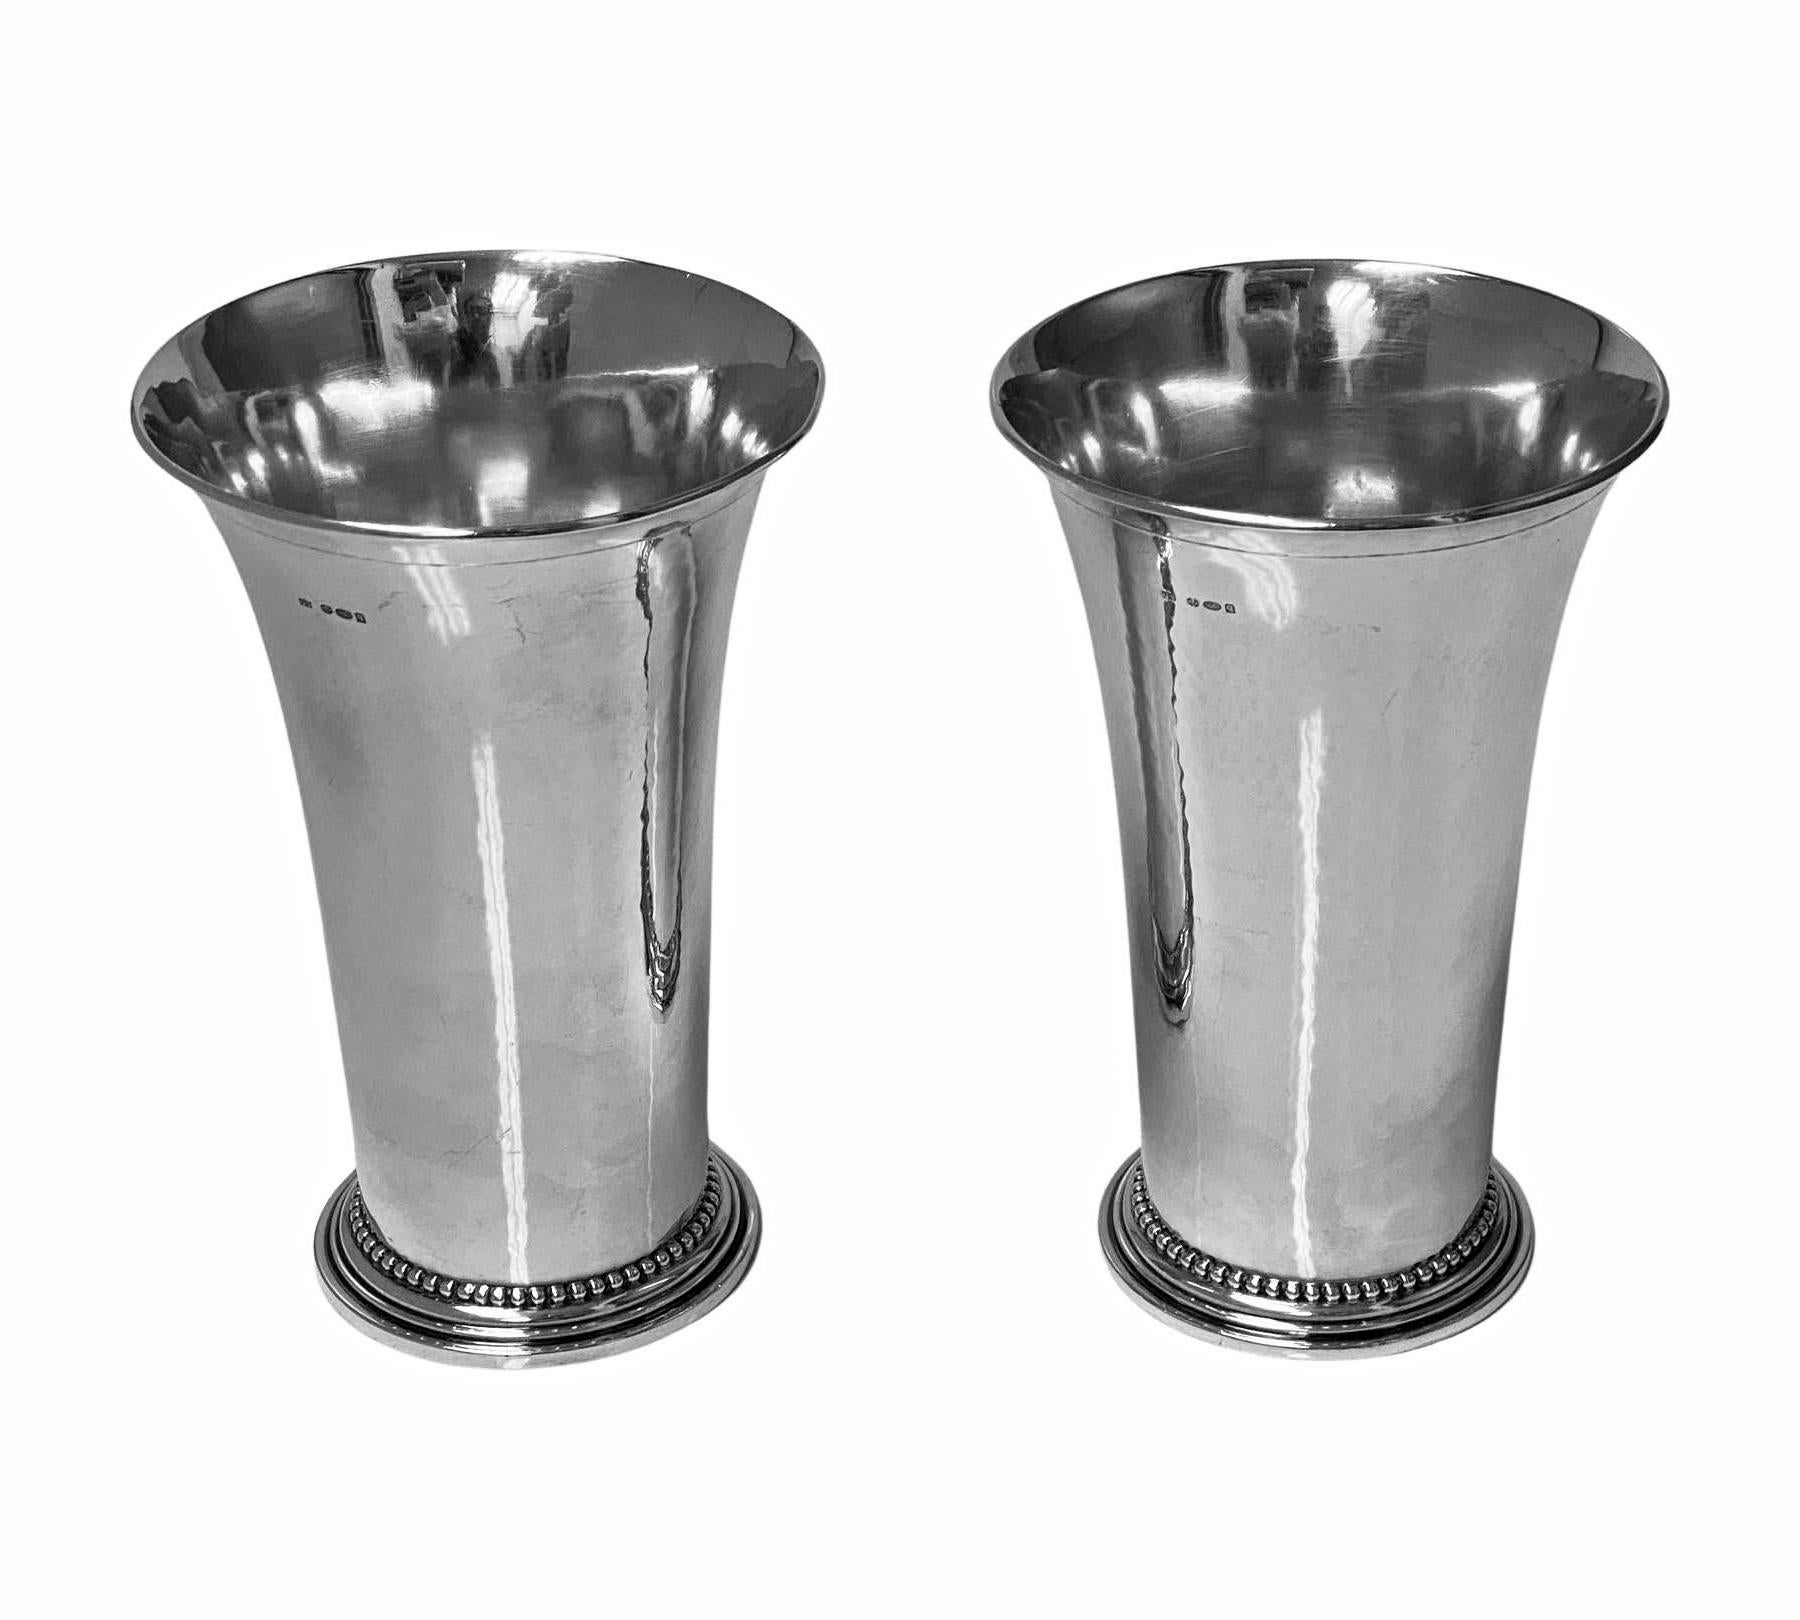 Pair of large Georg Jensen sterling vases. Each hand hammered tapered cylindrical form with flared everted rims on circular and concentric bead design bases. Stamped on base with Jensen marks for 1925-1932 numbered 107Band import marks for London